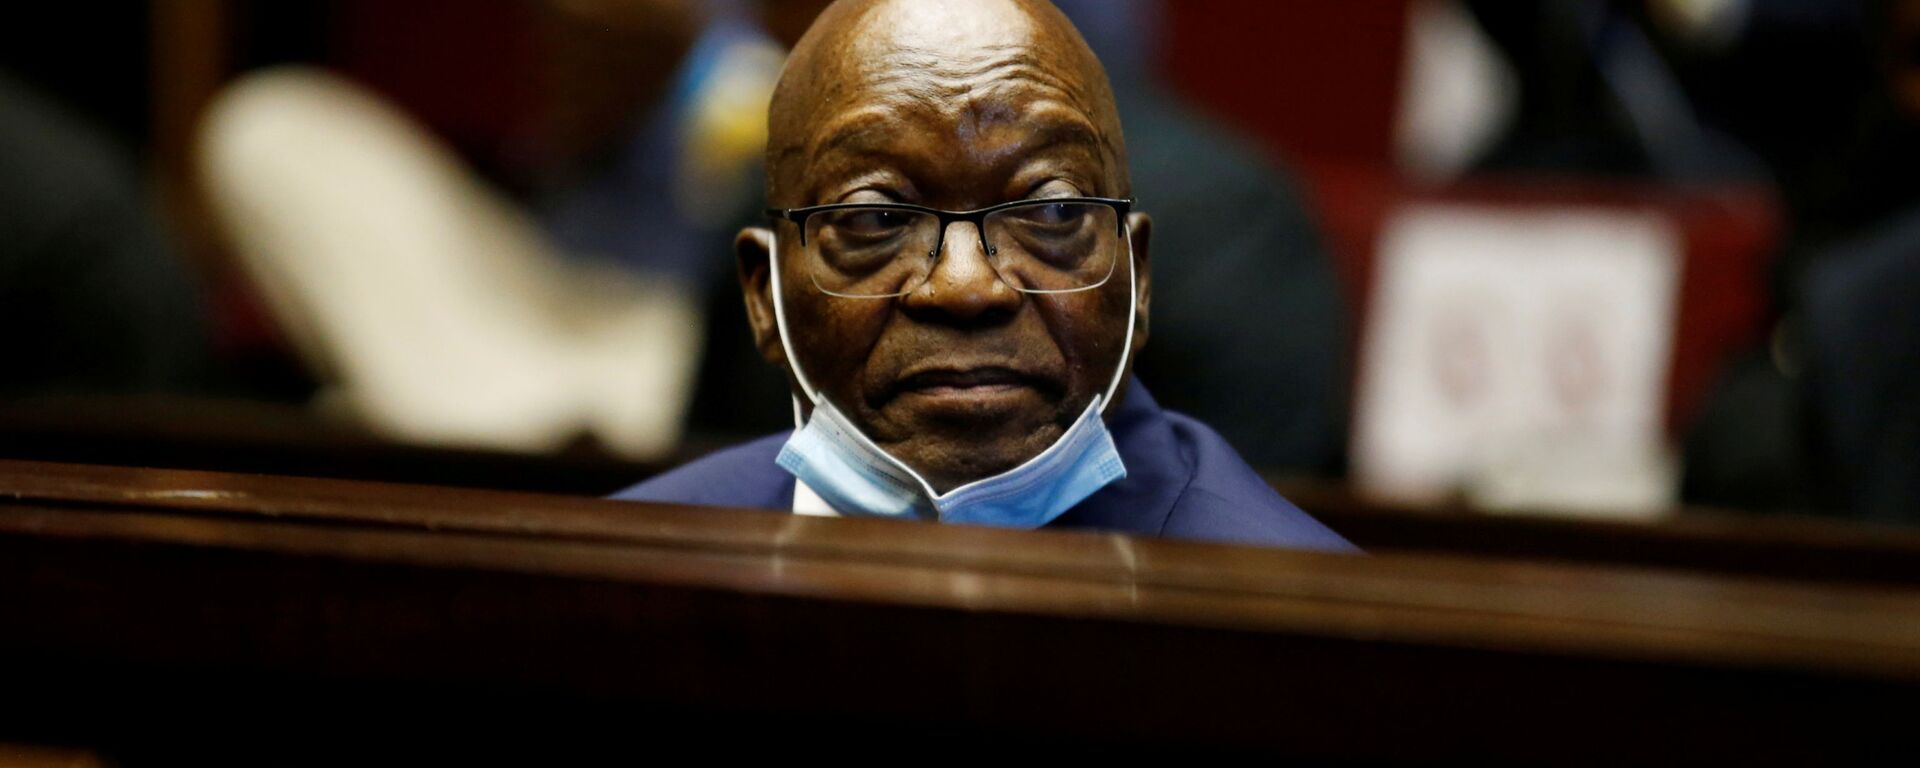 Former South African President Jacob Zuma sits in the dock after recess in his corruption trial in Pietermaritzburg, South Africa, May 26, 2021 - Sputnik International, 1920, 29.06.2021